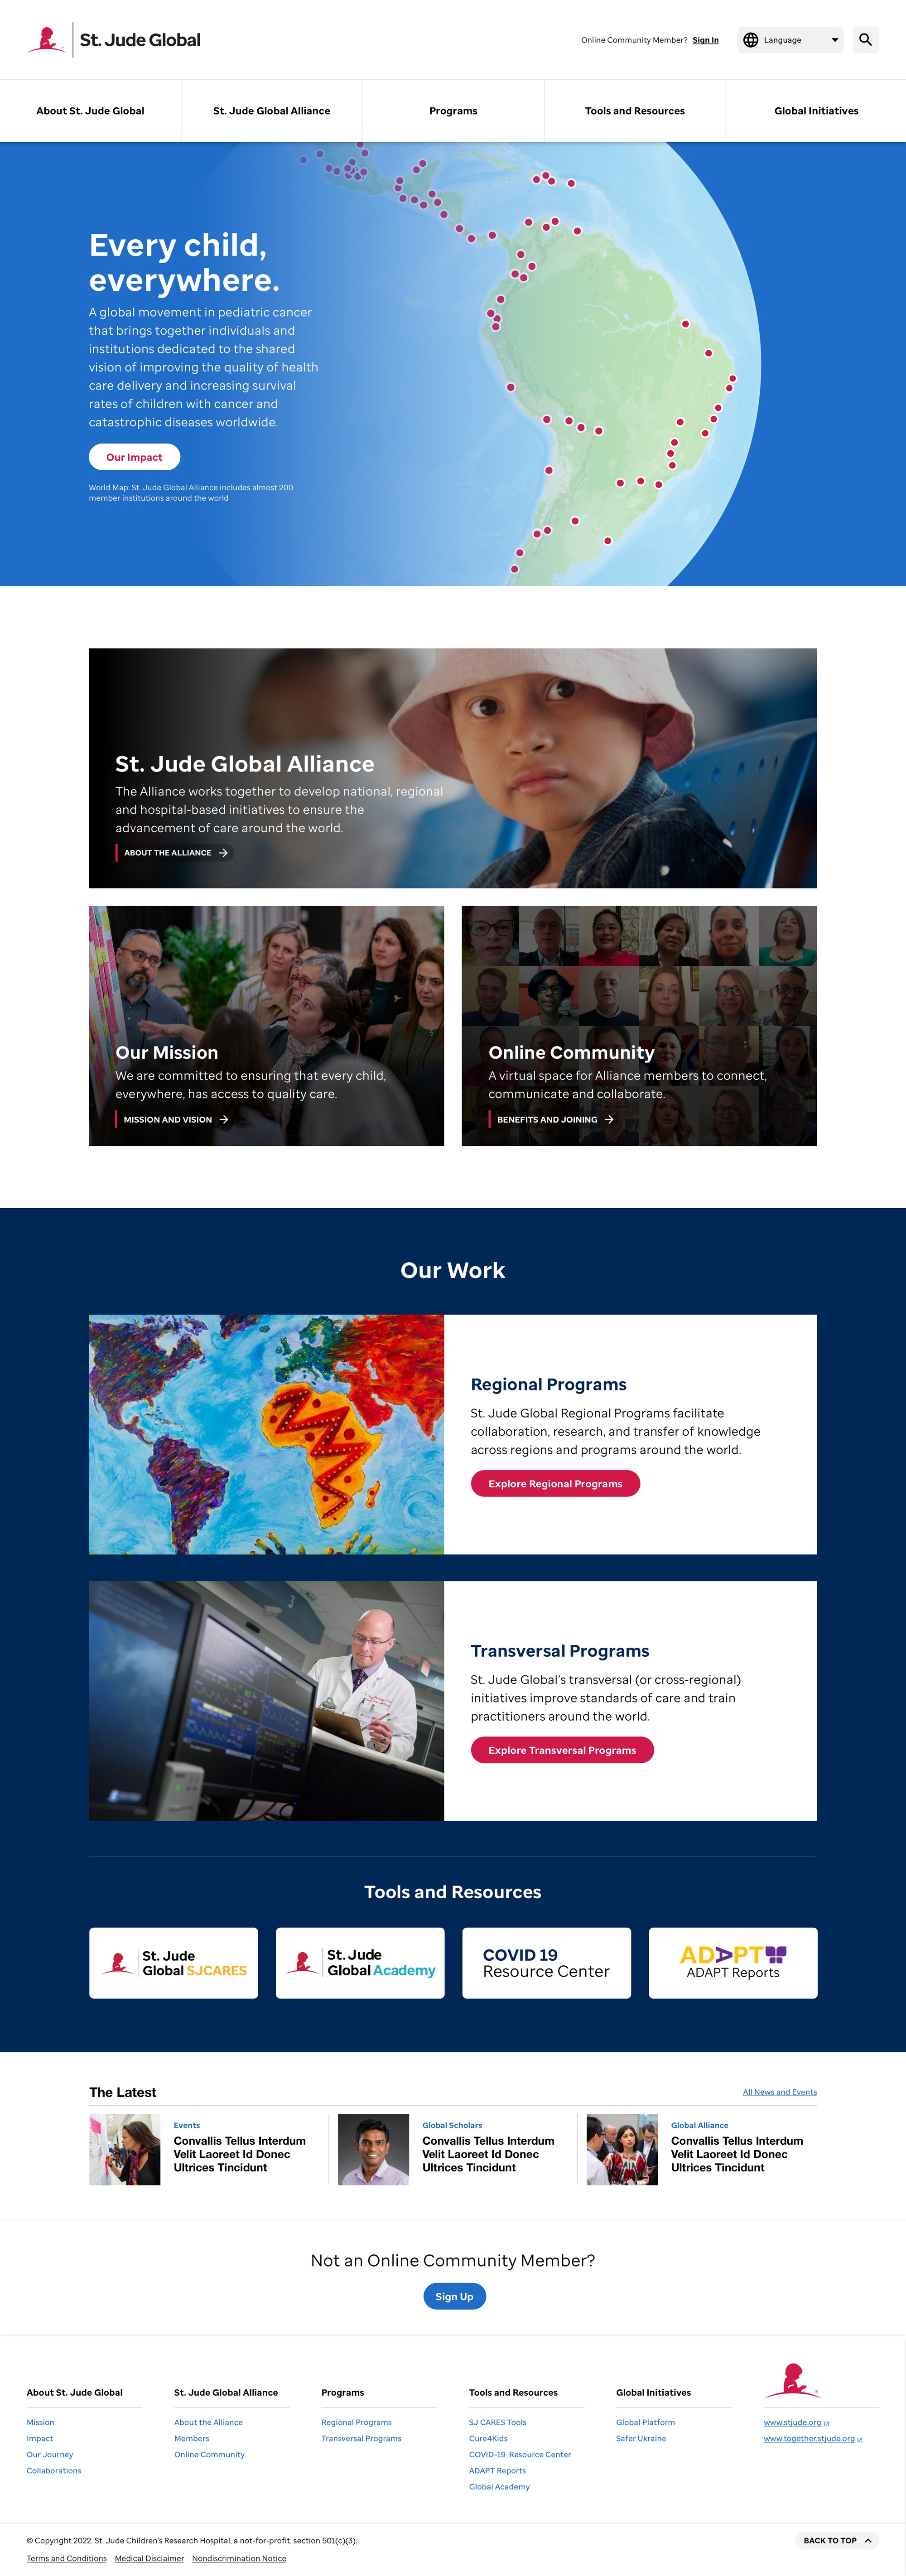 Mock-up image of the St. Jude Global homepage